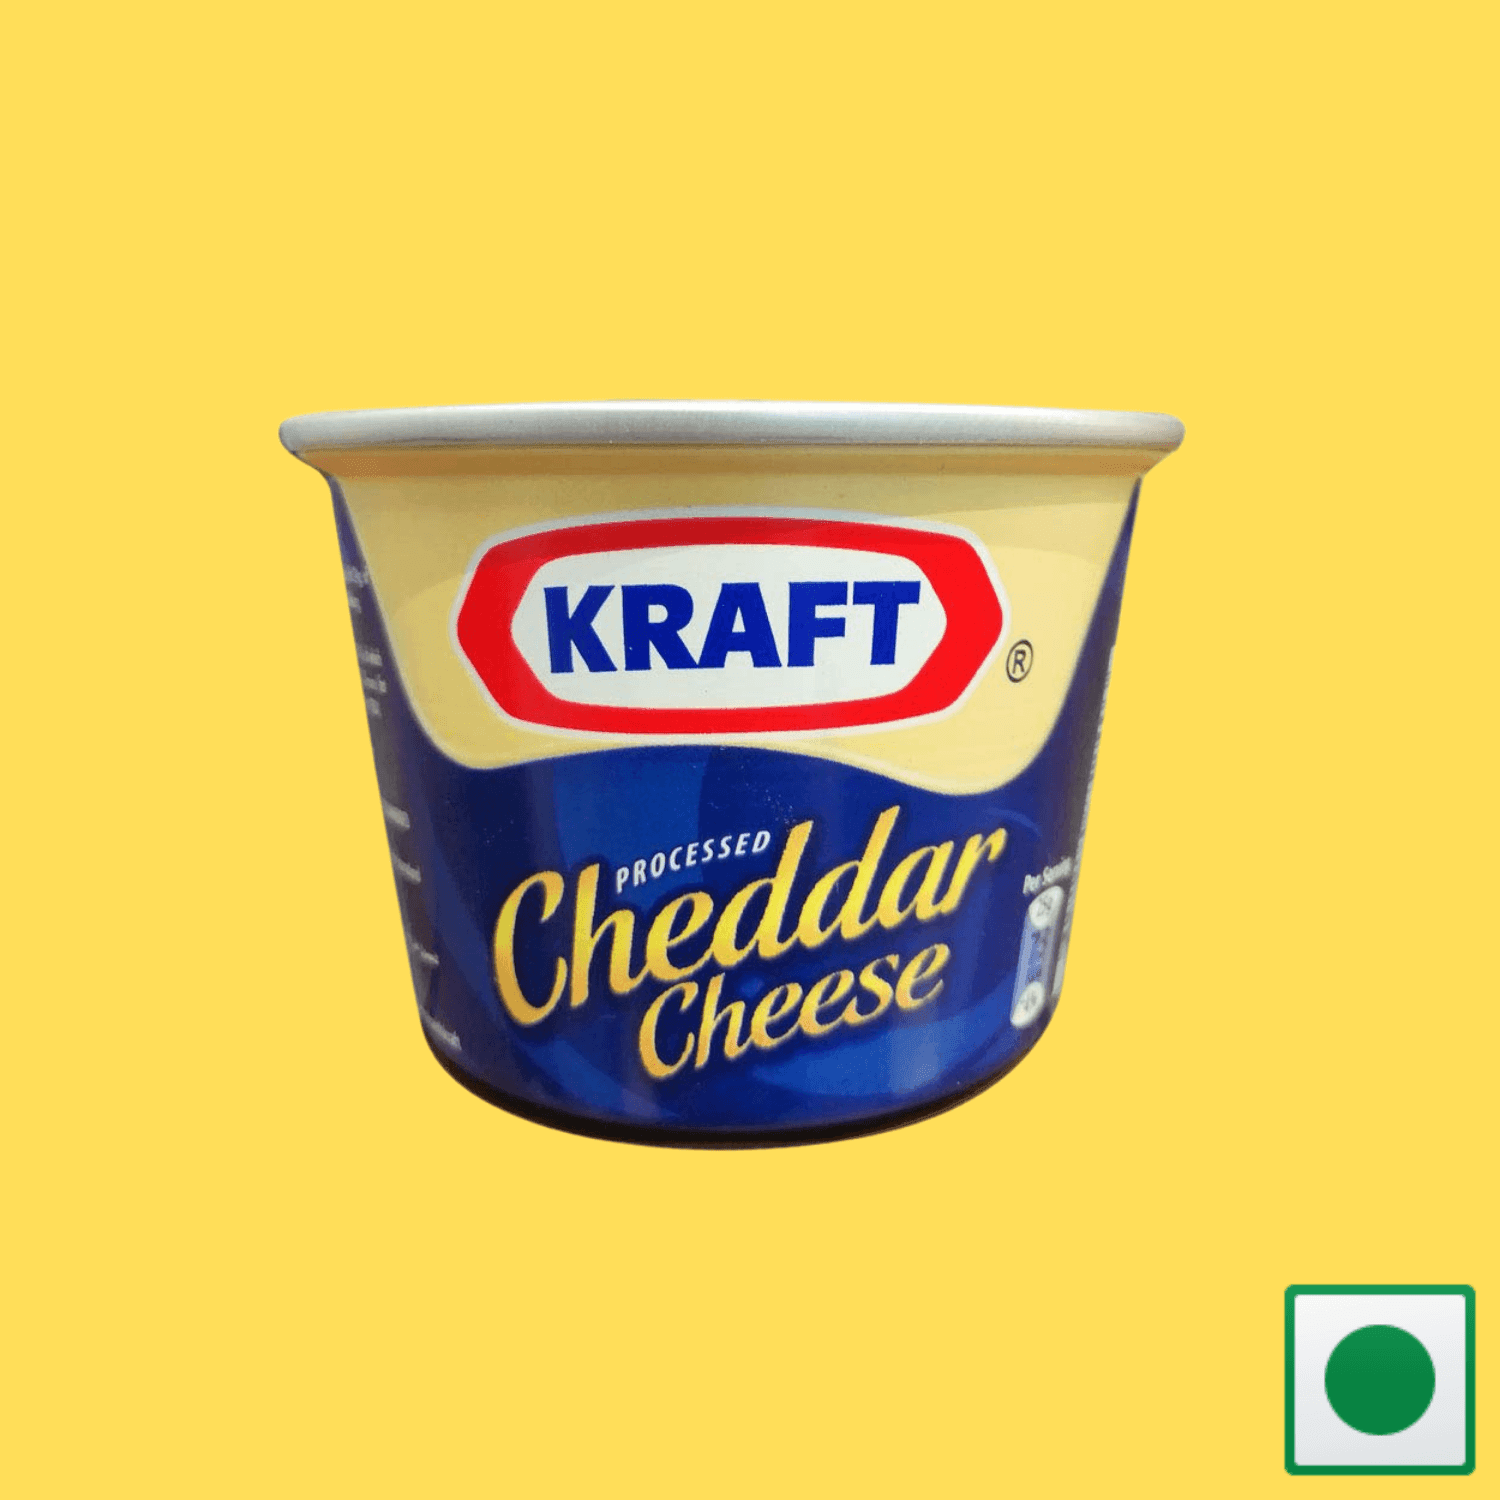 Kraft Processed Cheddar Cheese Tin,190g (Imported) - Super 7 Mart